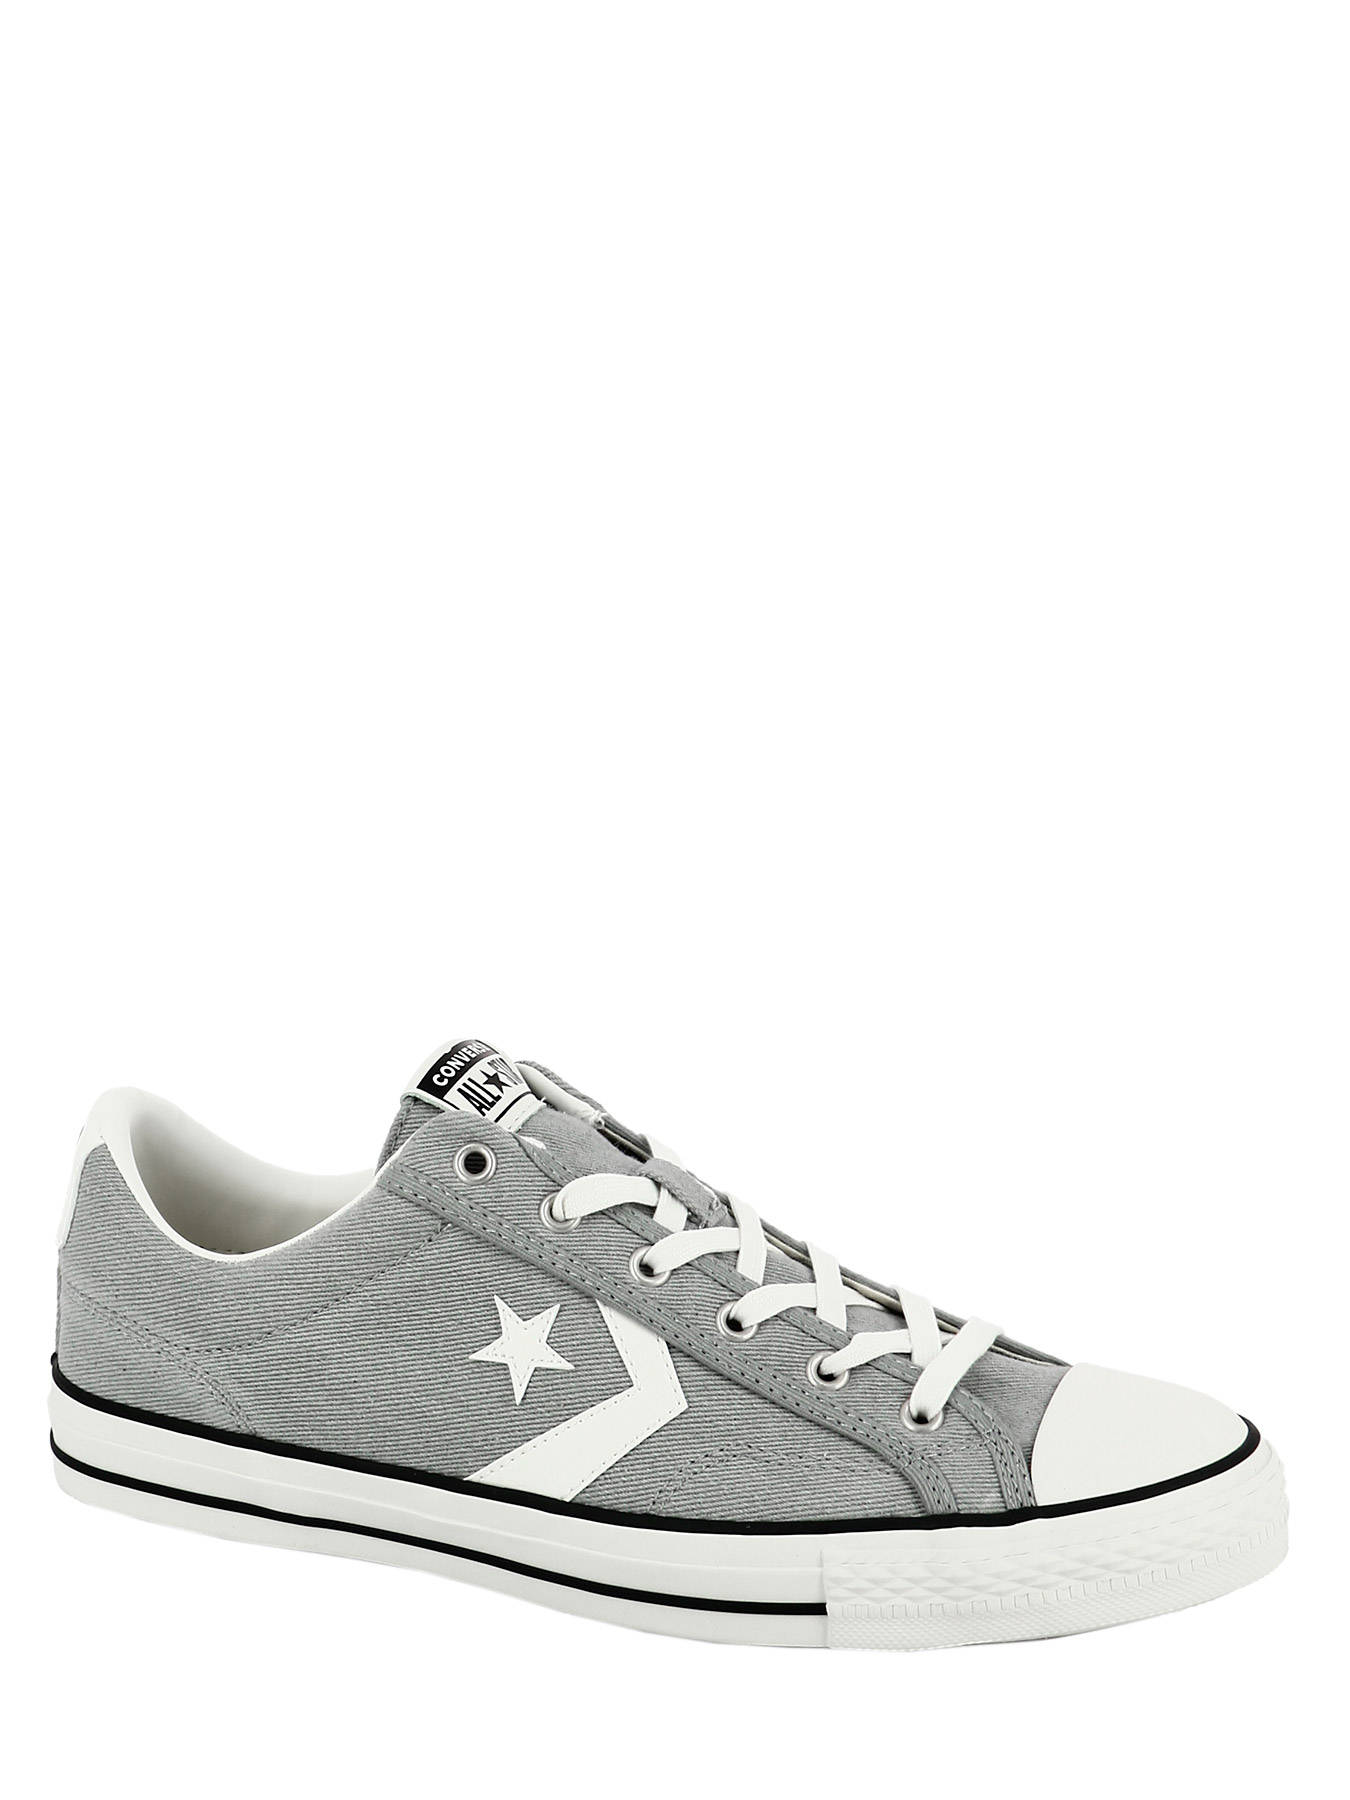 converse star player dolphin